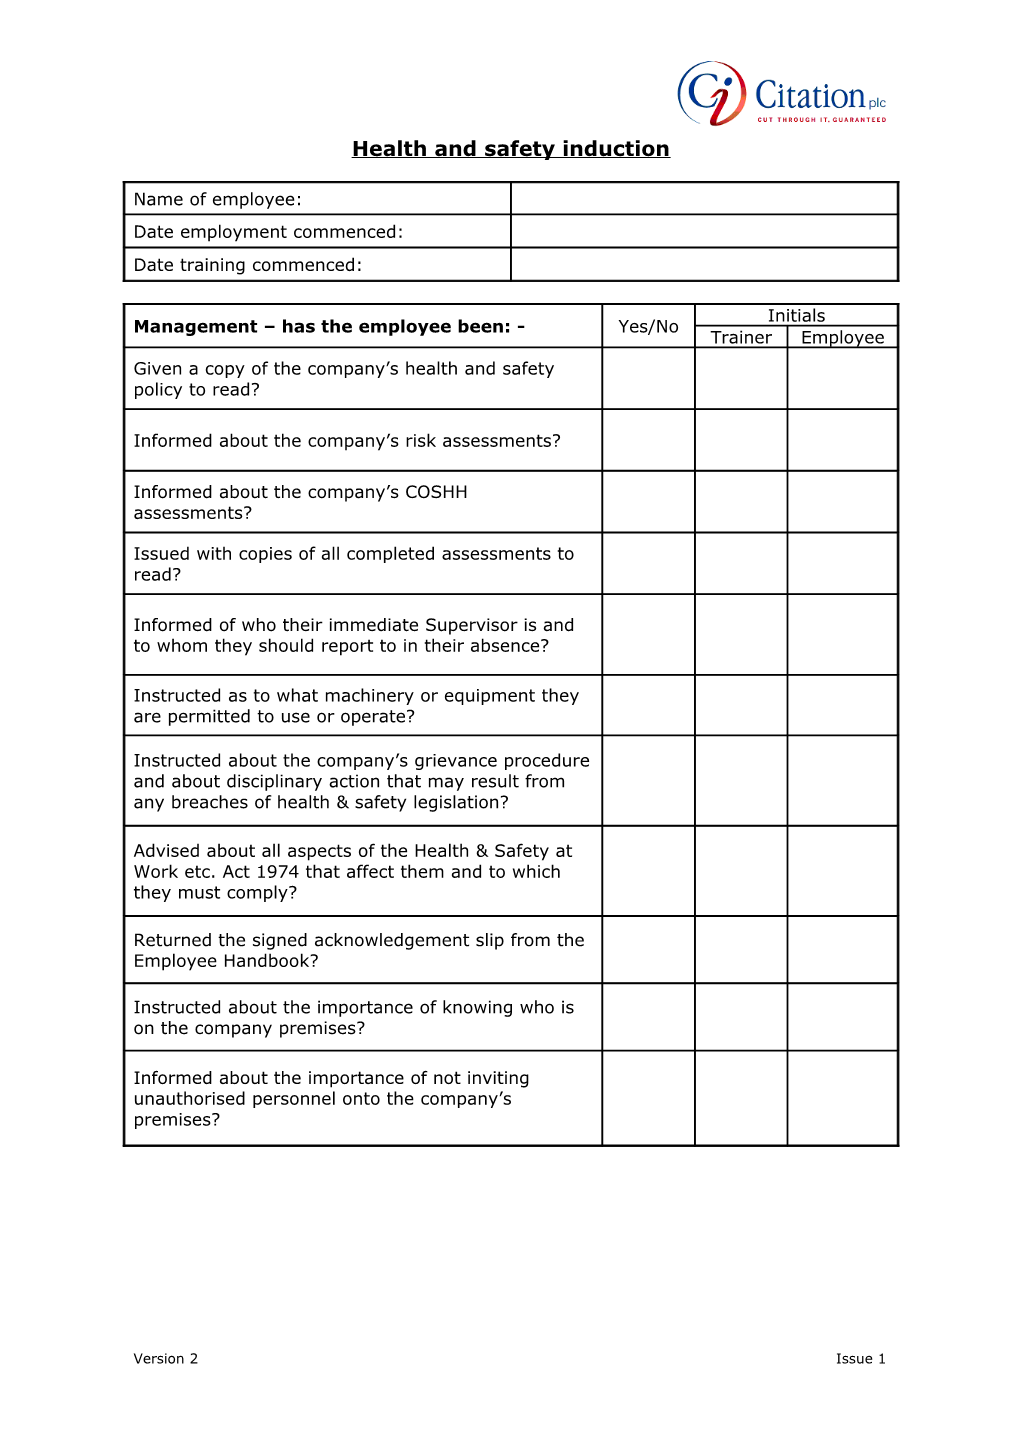 Health and Safety Induction Check Sheet